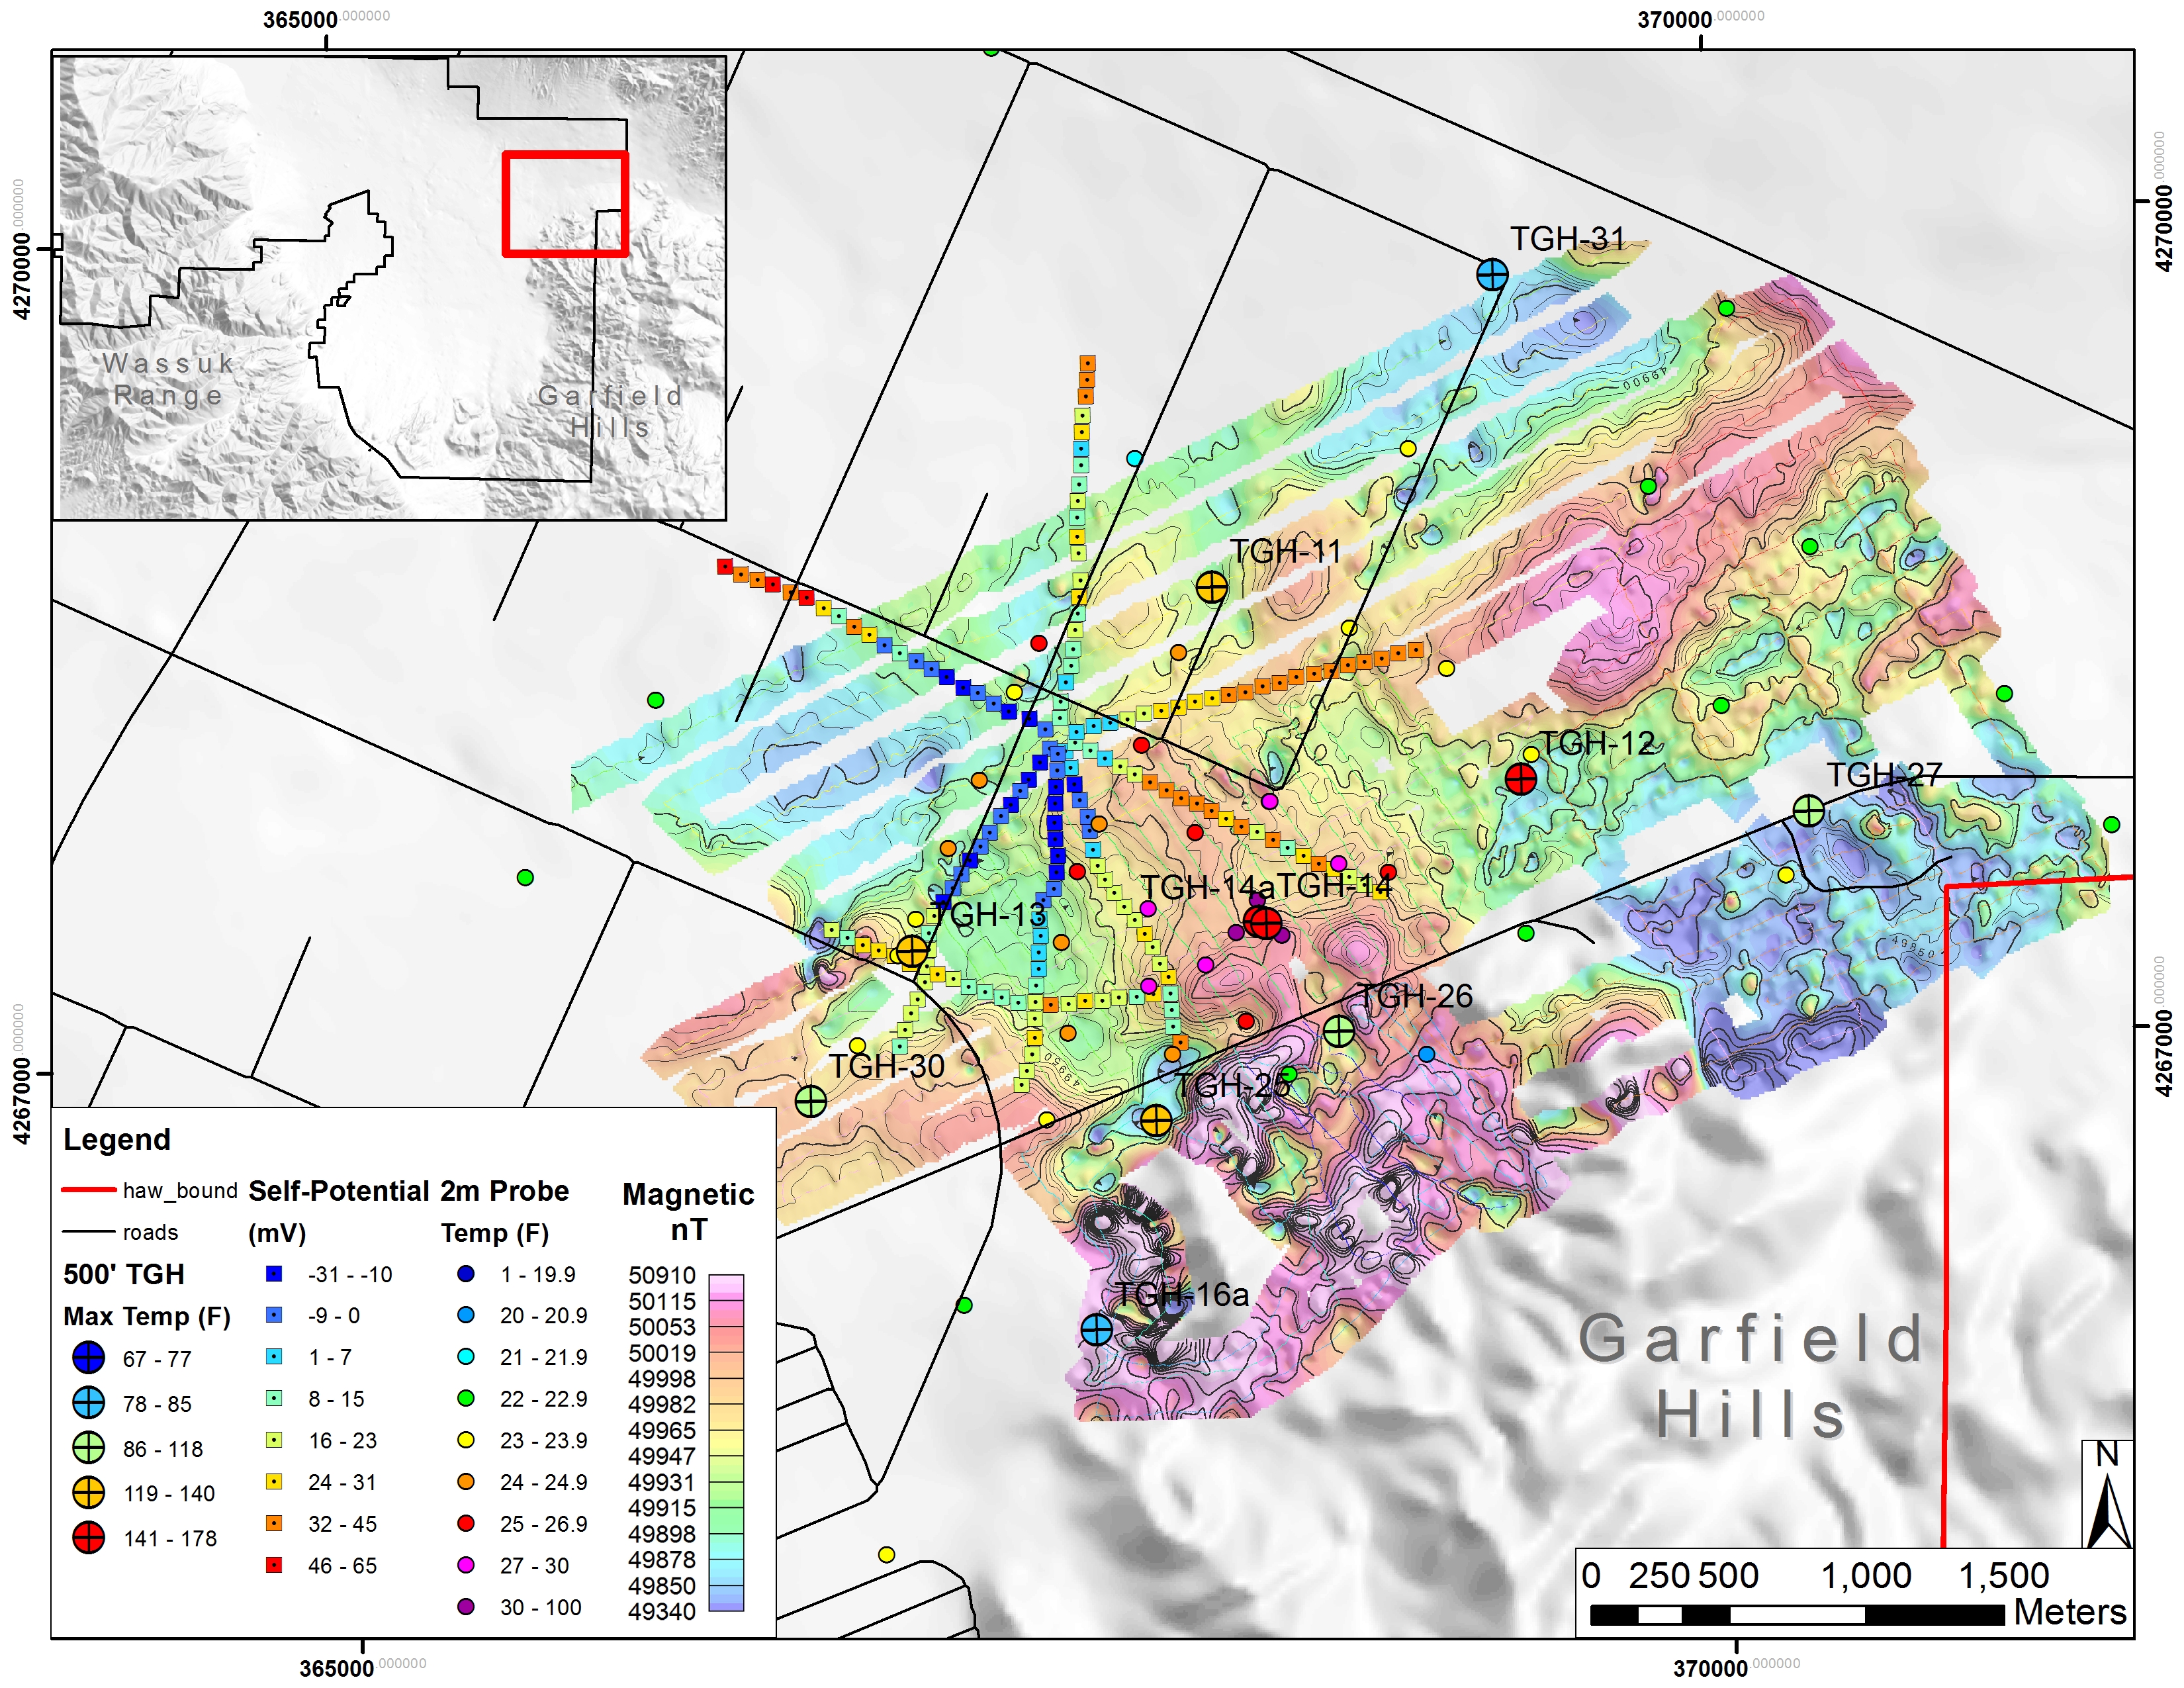 SP and magnetic data at northern Garfield Hills, Mineral County, Nevada. Data collected to locate upwelling fluids and structures associated with shallow high temperature thermal anomaly.